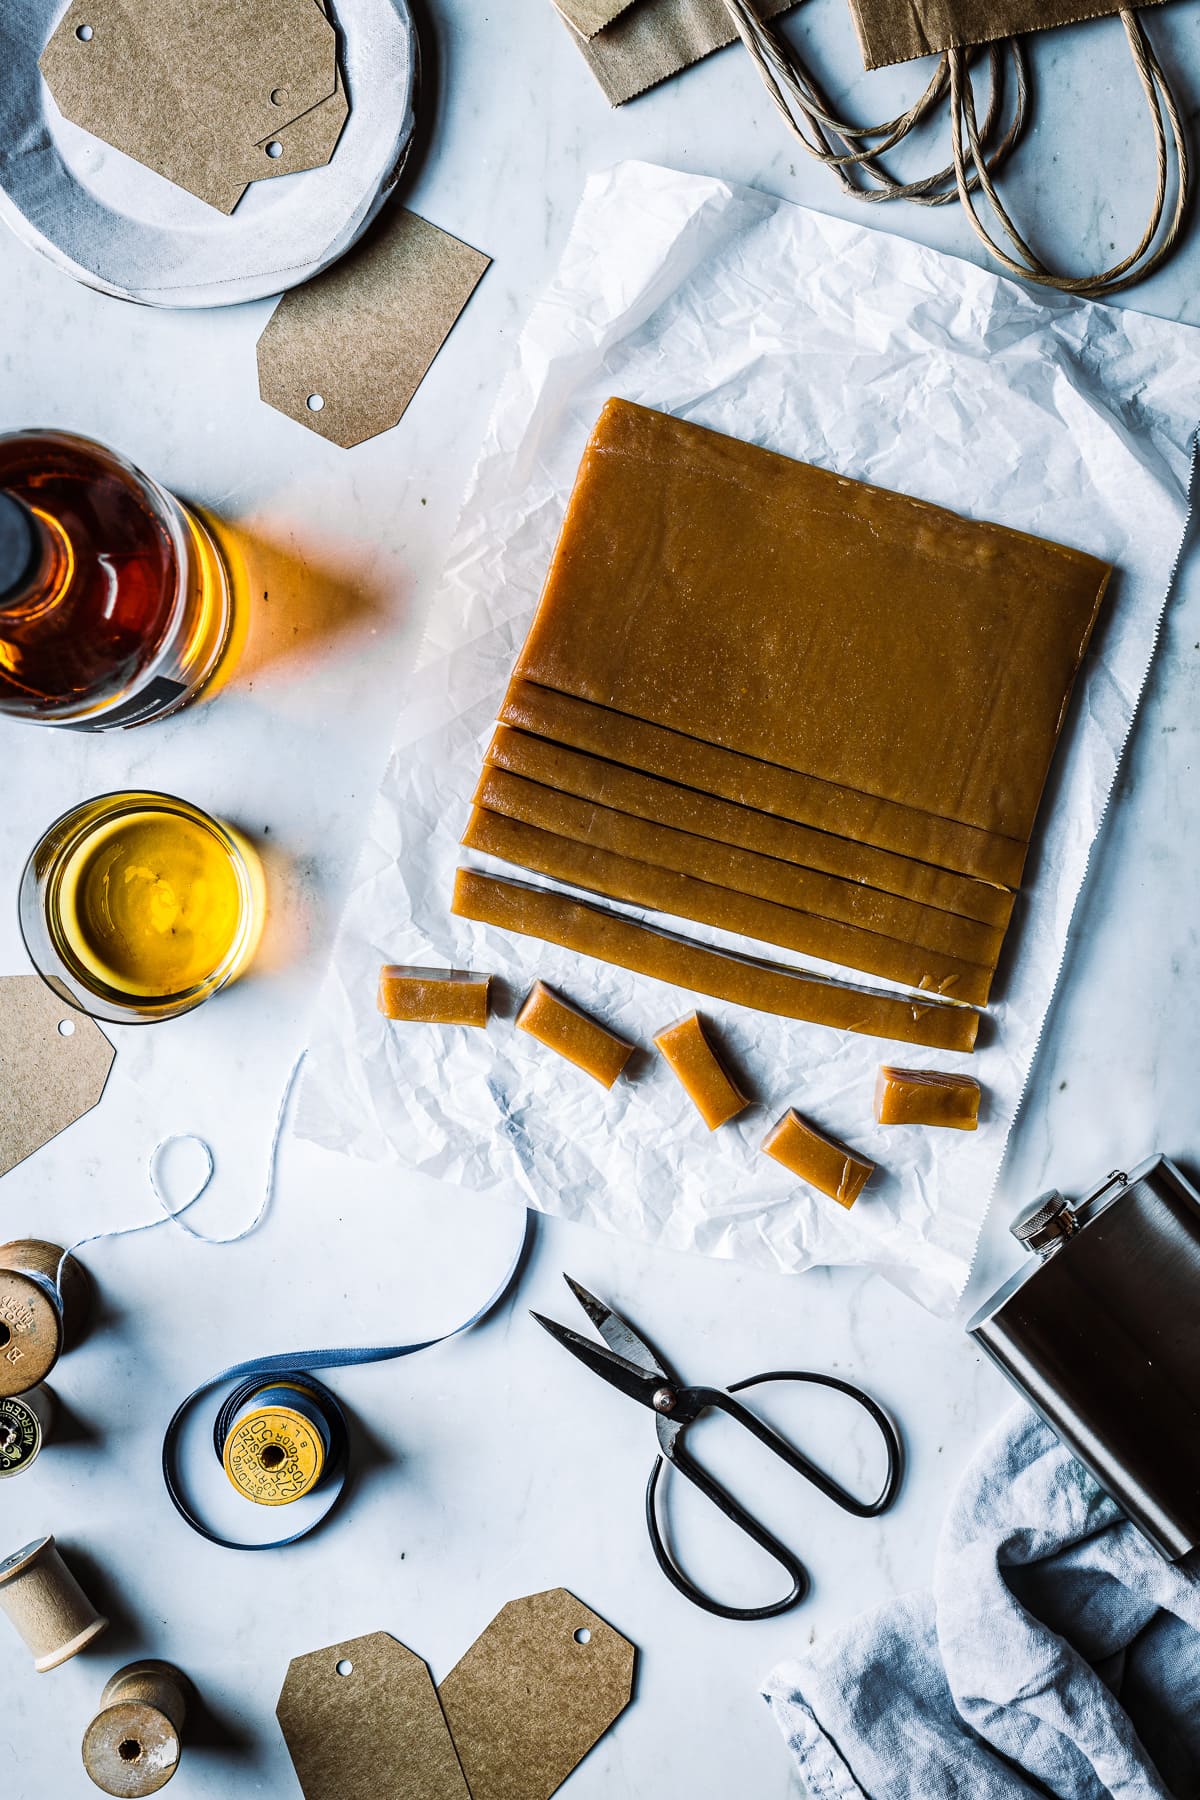 Caramels being cut into individual pieces on parchment paper on a marble surface. Surrounding the caramels are gift wrapping supplies, a bottle of whiskey, scissors, ribbons, gift tags and a flask.